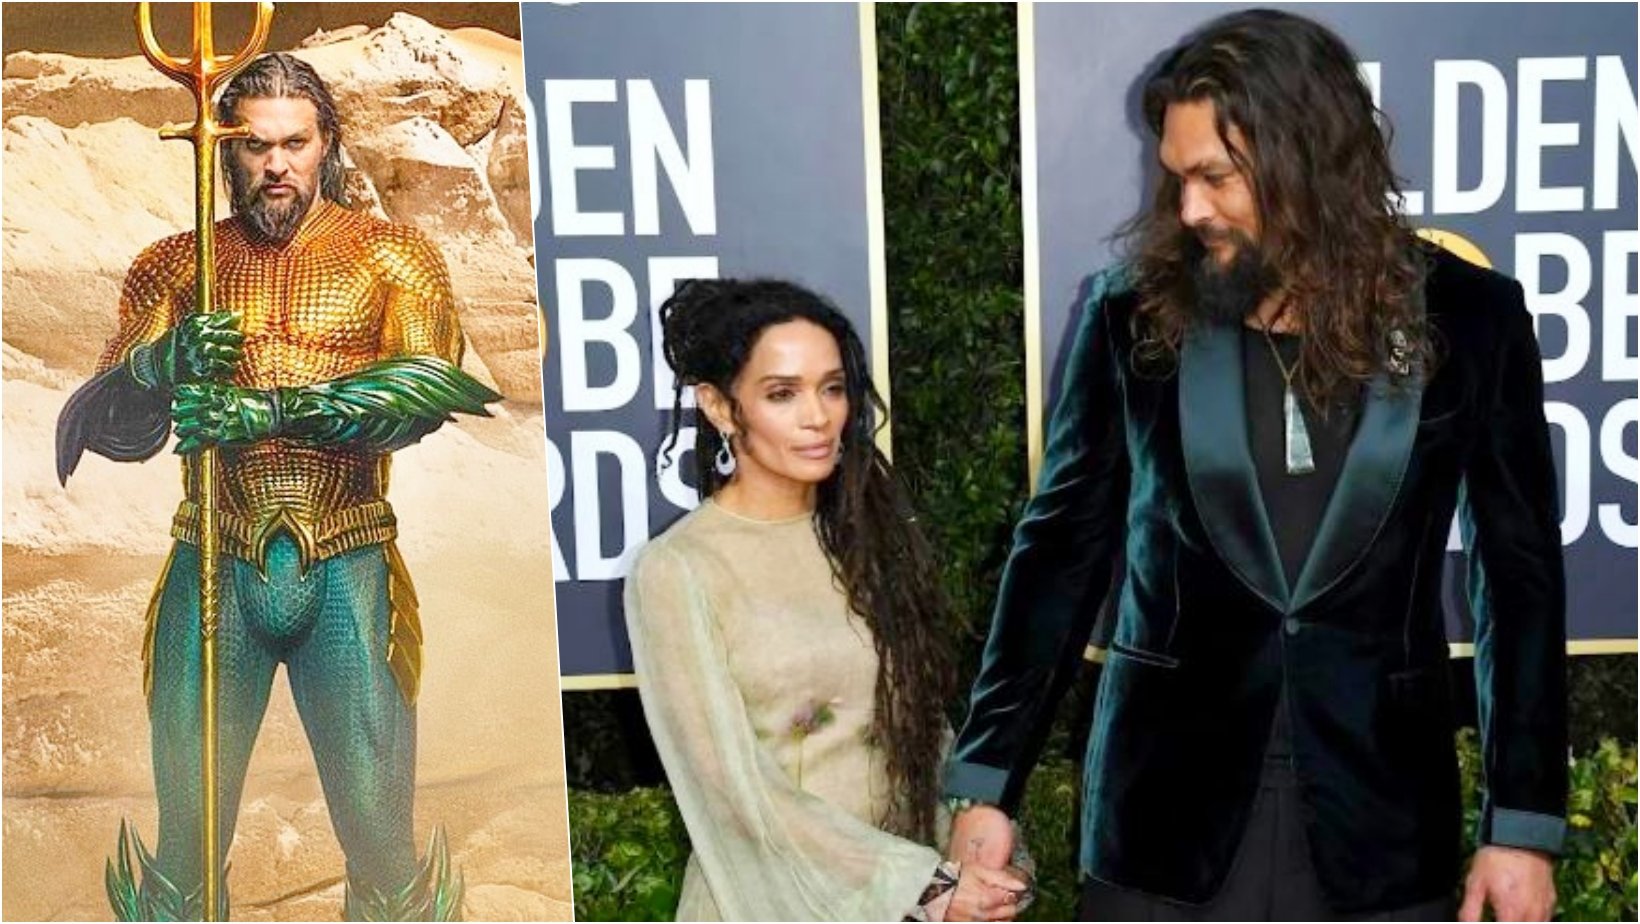 6 facebook cover 9.jpg?resize=412,232 - Despite The Tough Look, Jason Momoa Reveals That He’s Absolutely Terrified Of His Wife